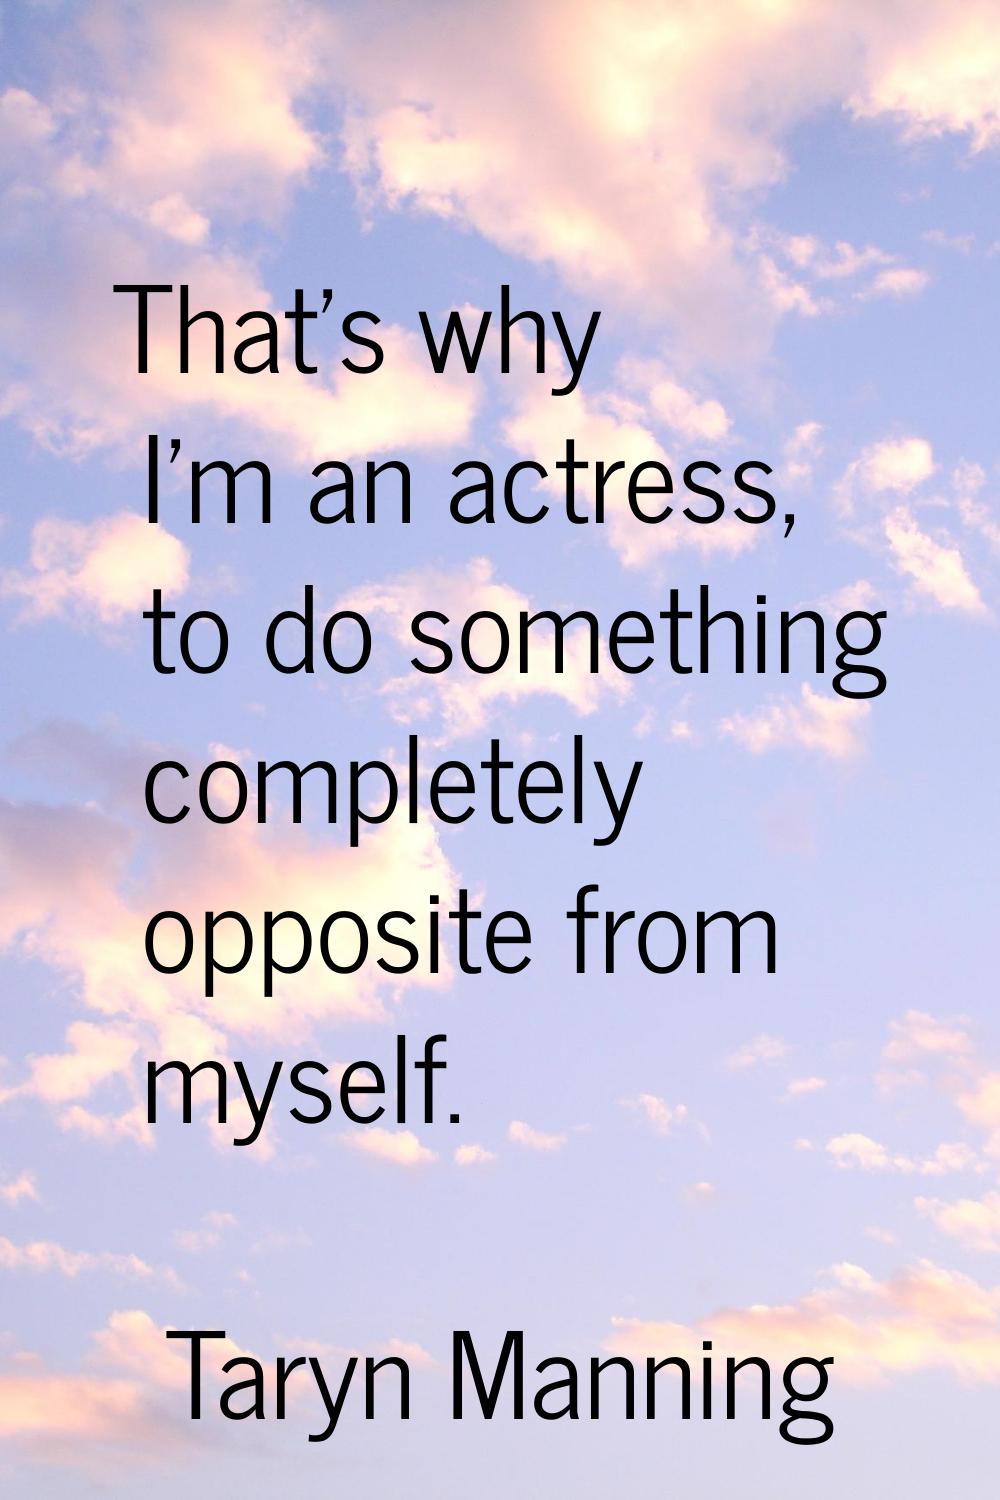 That's why I'm an actress, to do something completely opposite from myself.